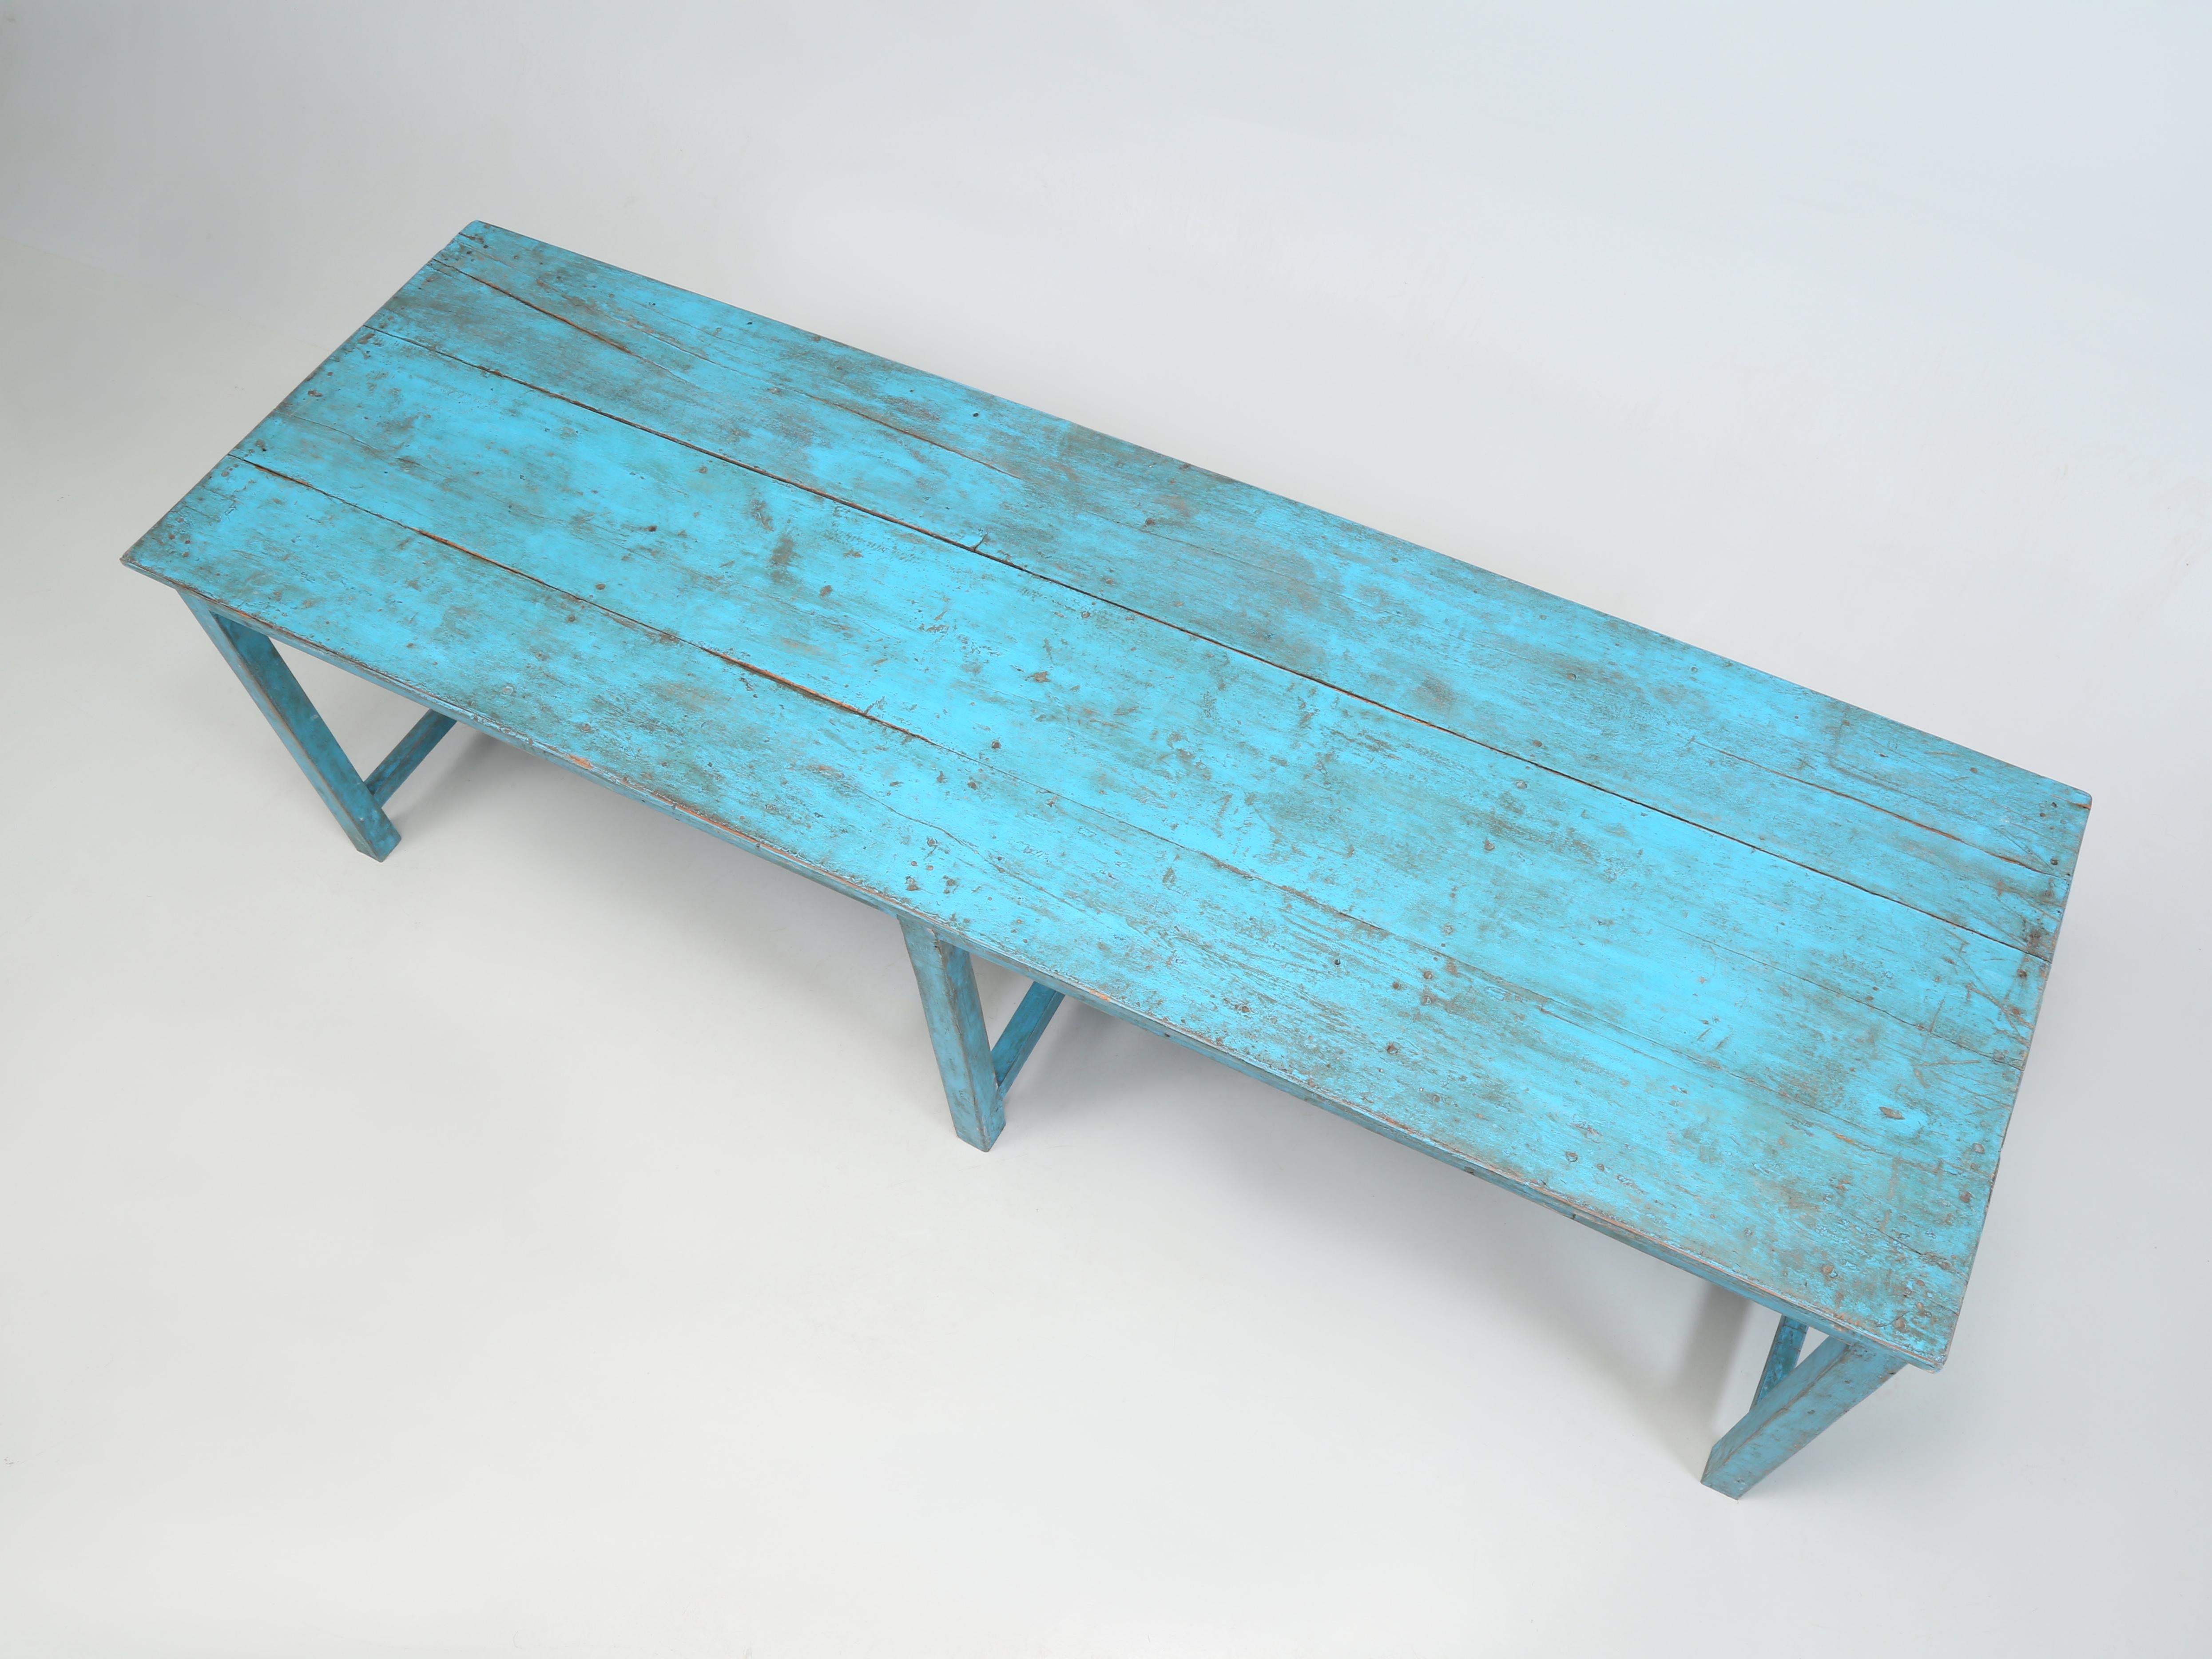 Found in Wisconsin is an Old Painted Farm Table in a terrific and unusual shade of blue, which we love. The corners at some point in the past were reinforced with 90-degree steel brackets and we could eliminate them if you like. Finding Genuine Old